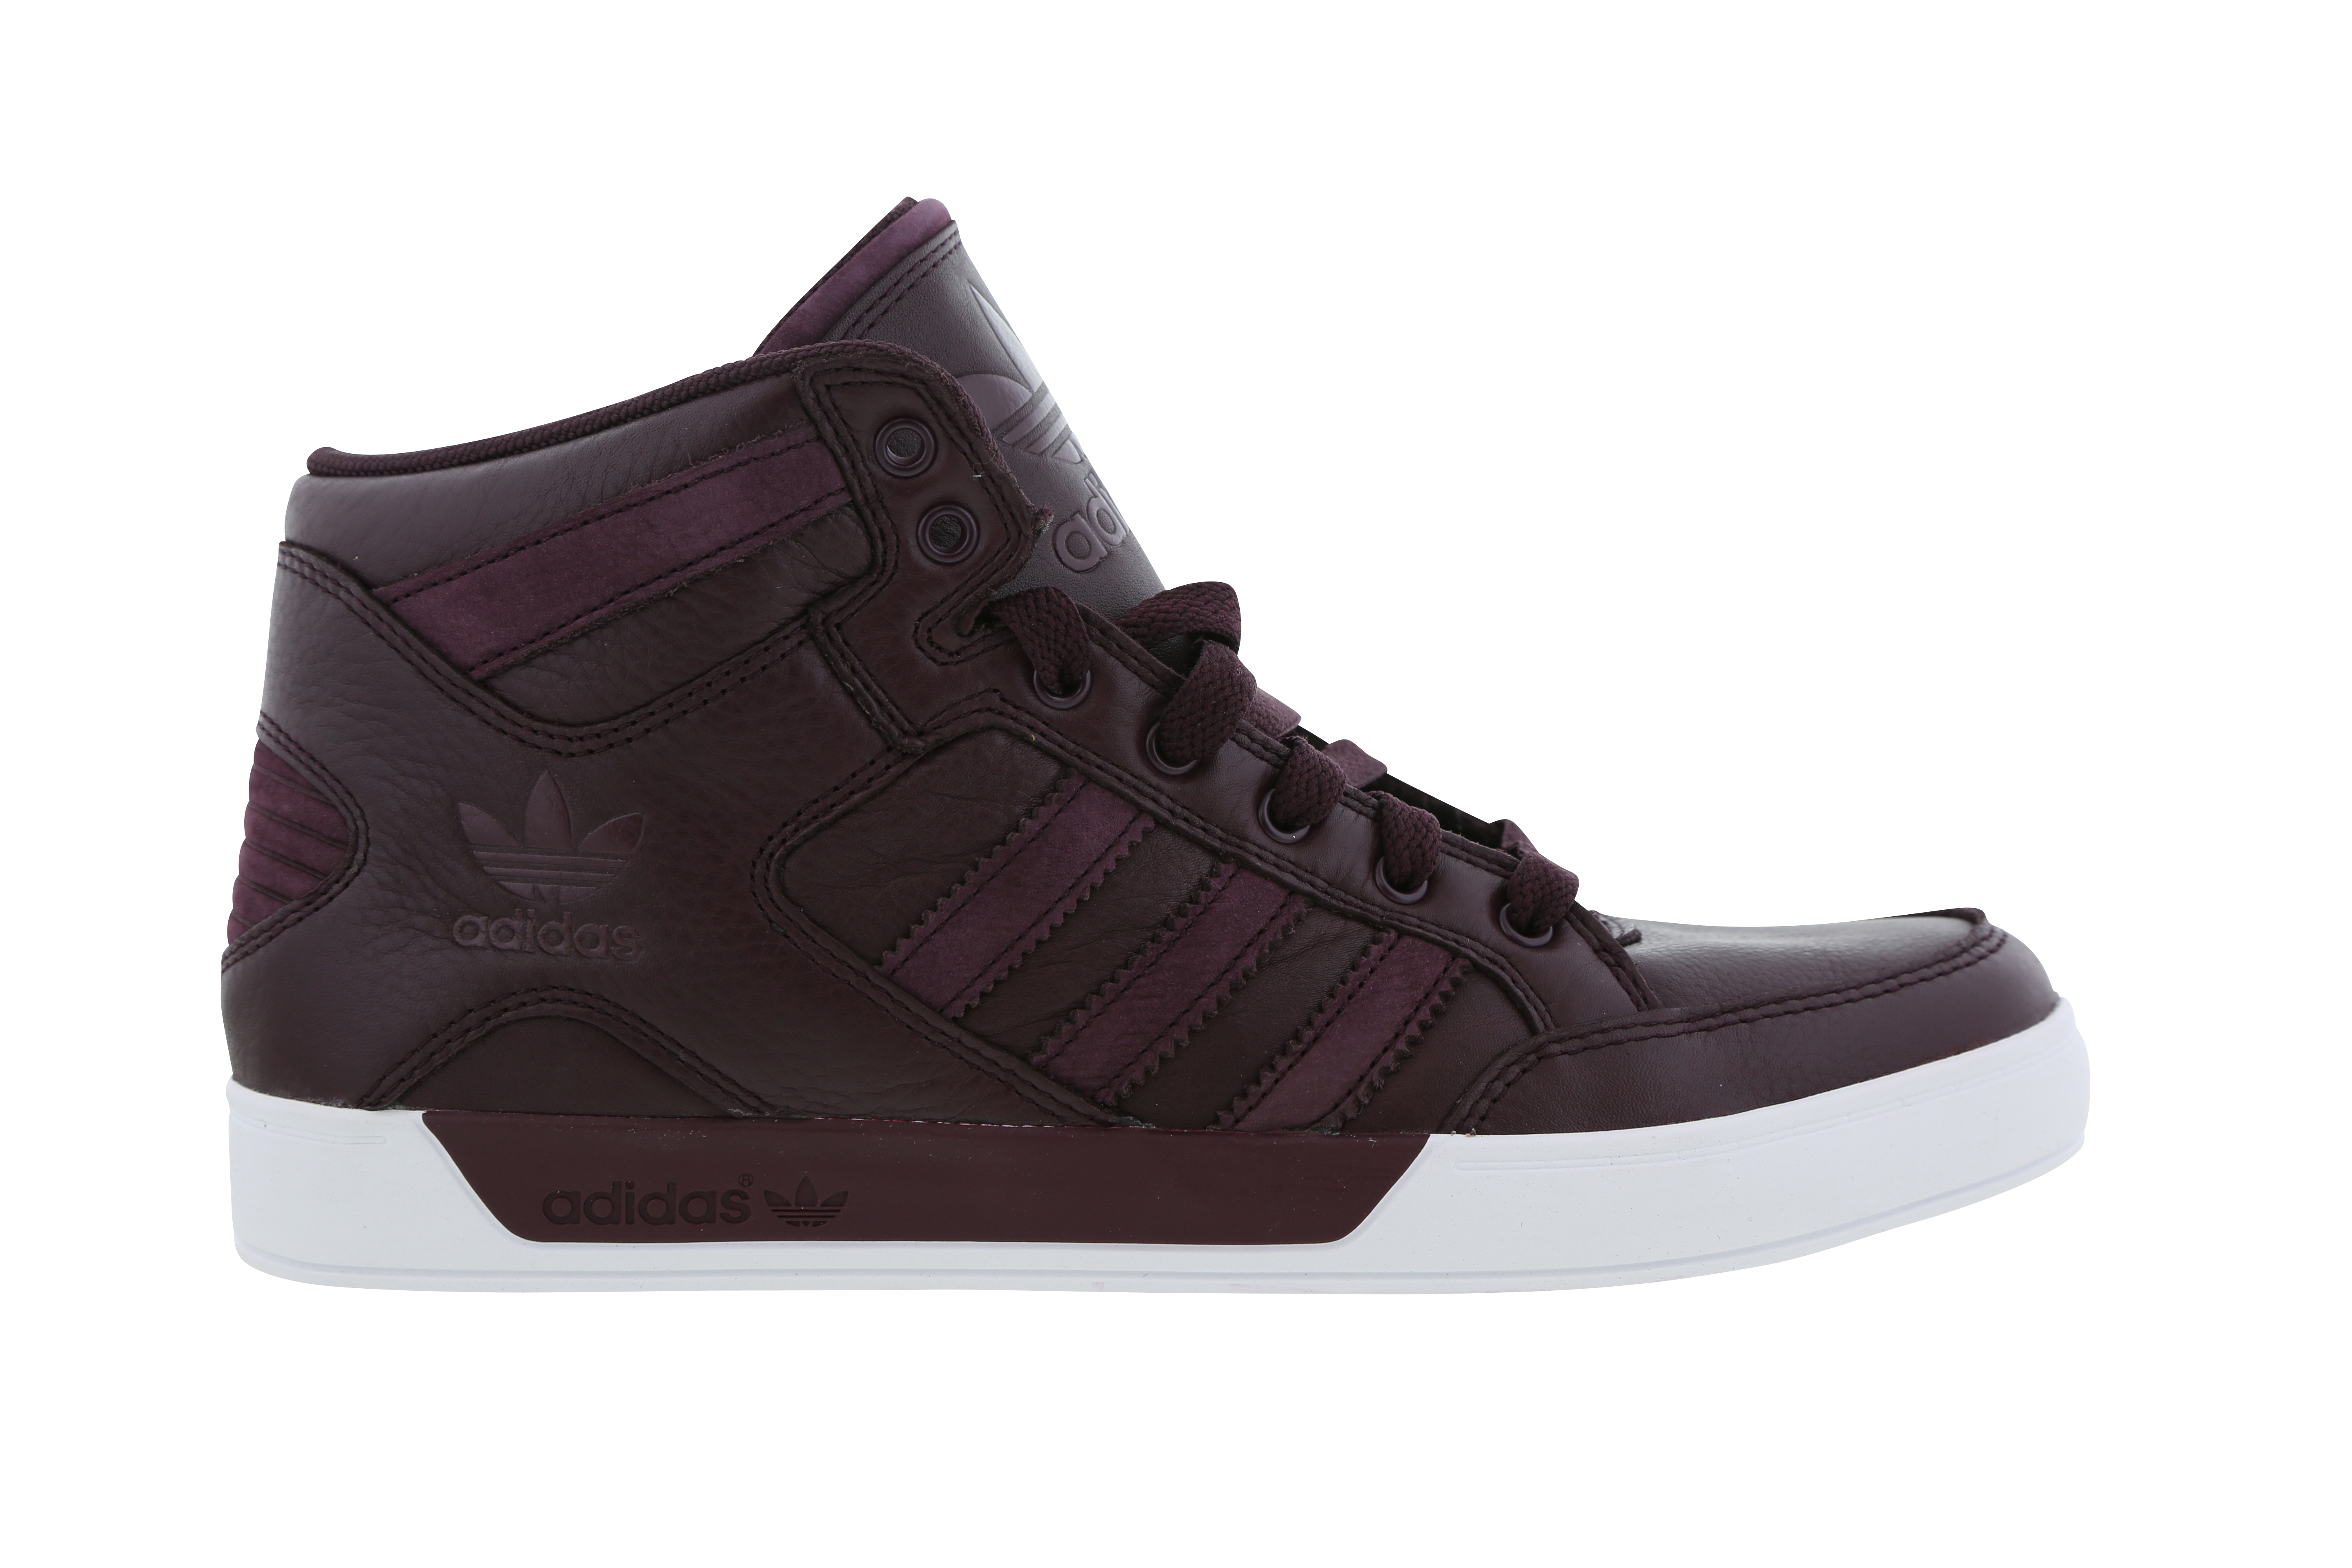 adidas hardcourt waxy crafted homme chaussures